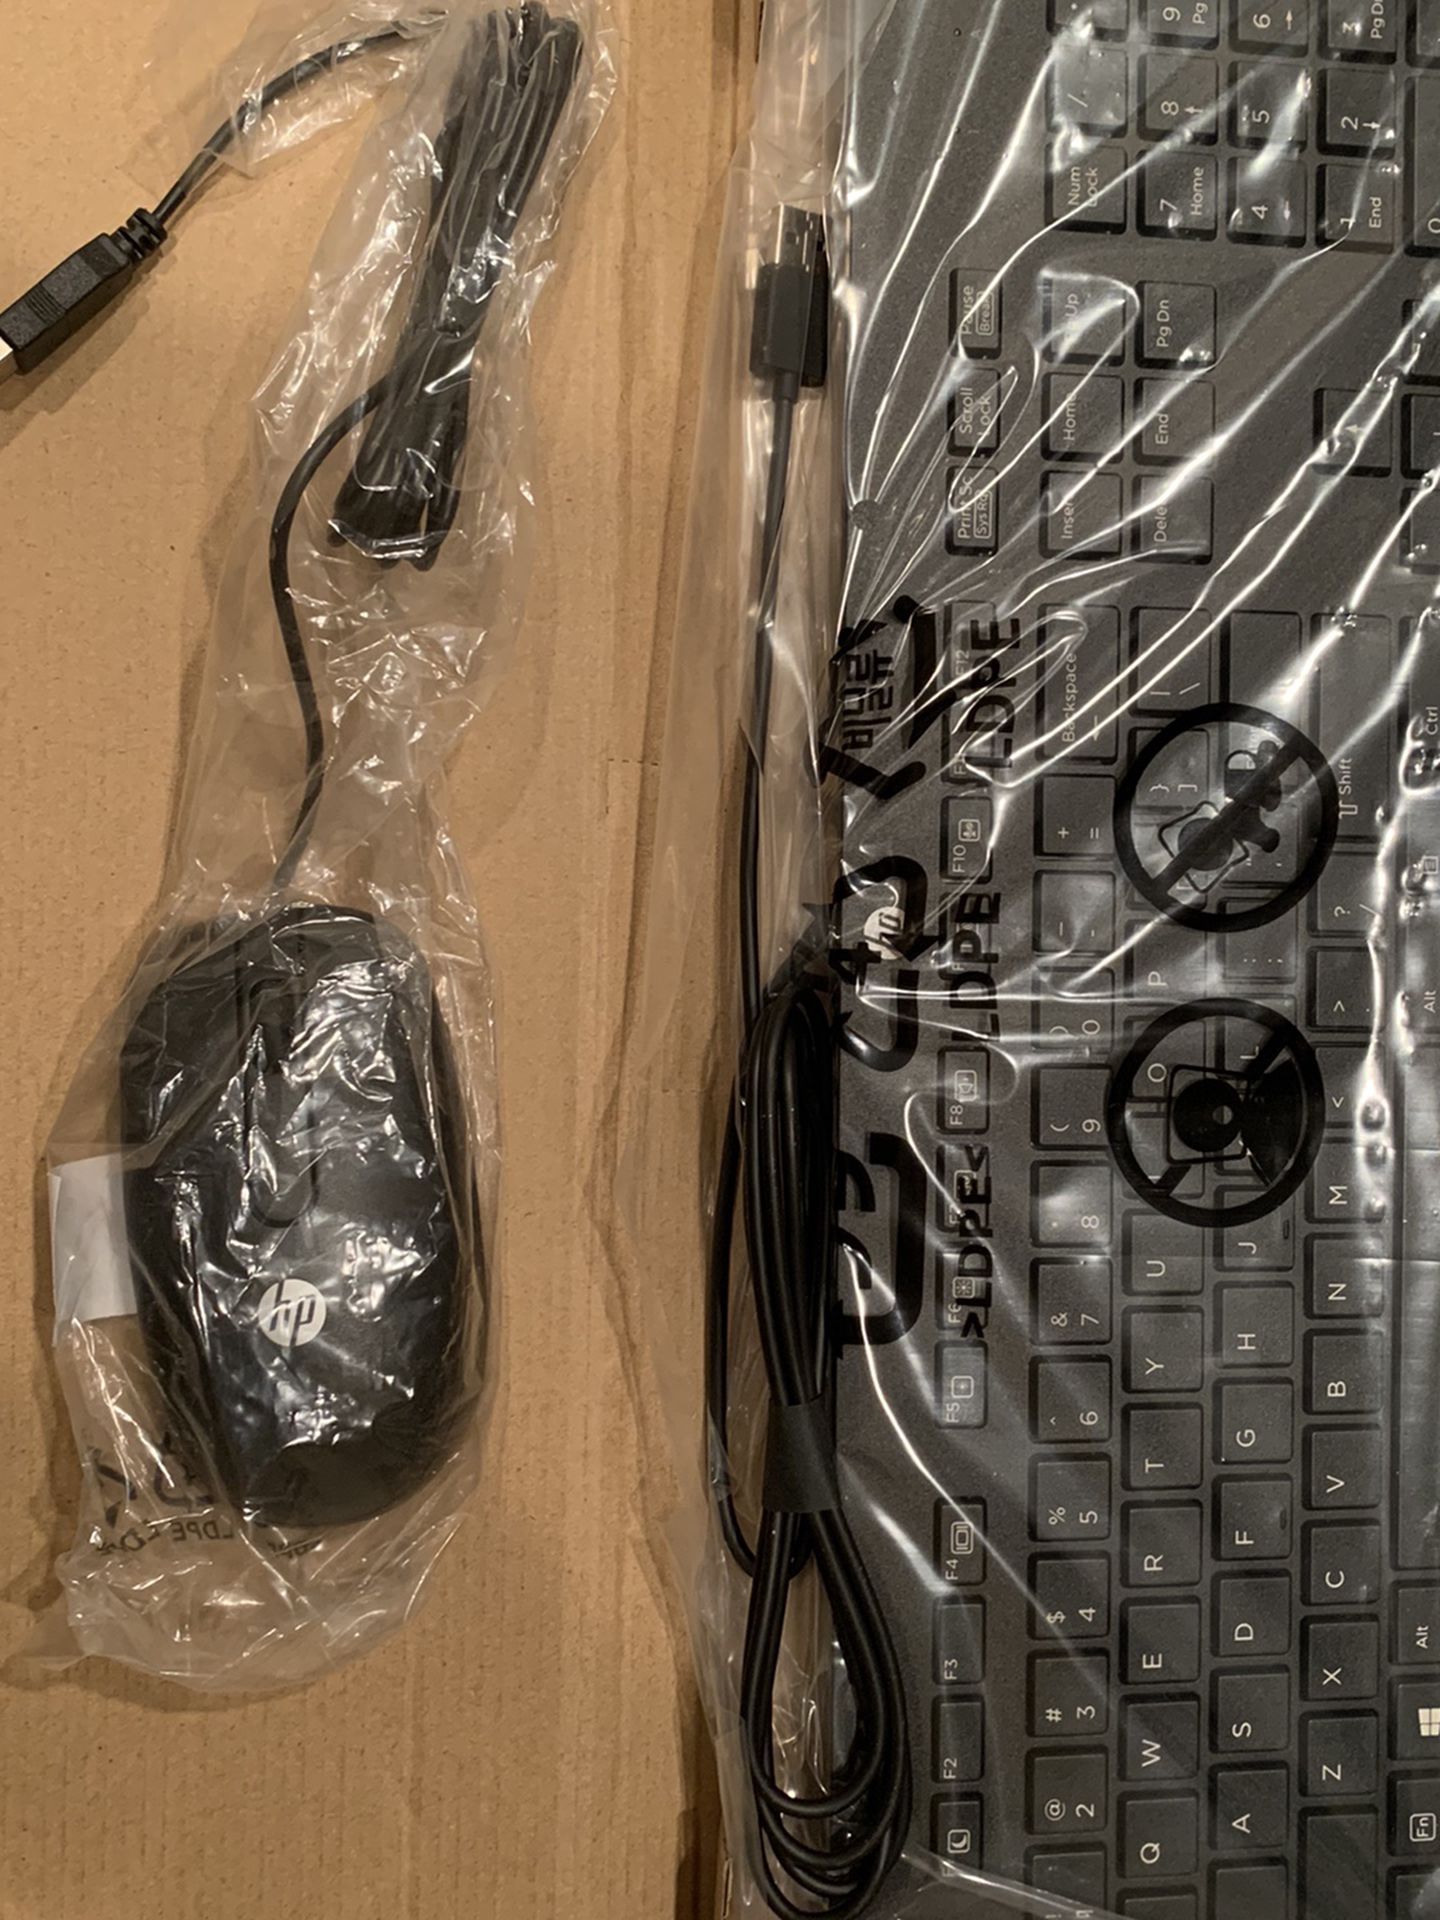 BRAND NEW! HP wired Keyboard/Mouse